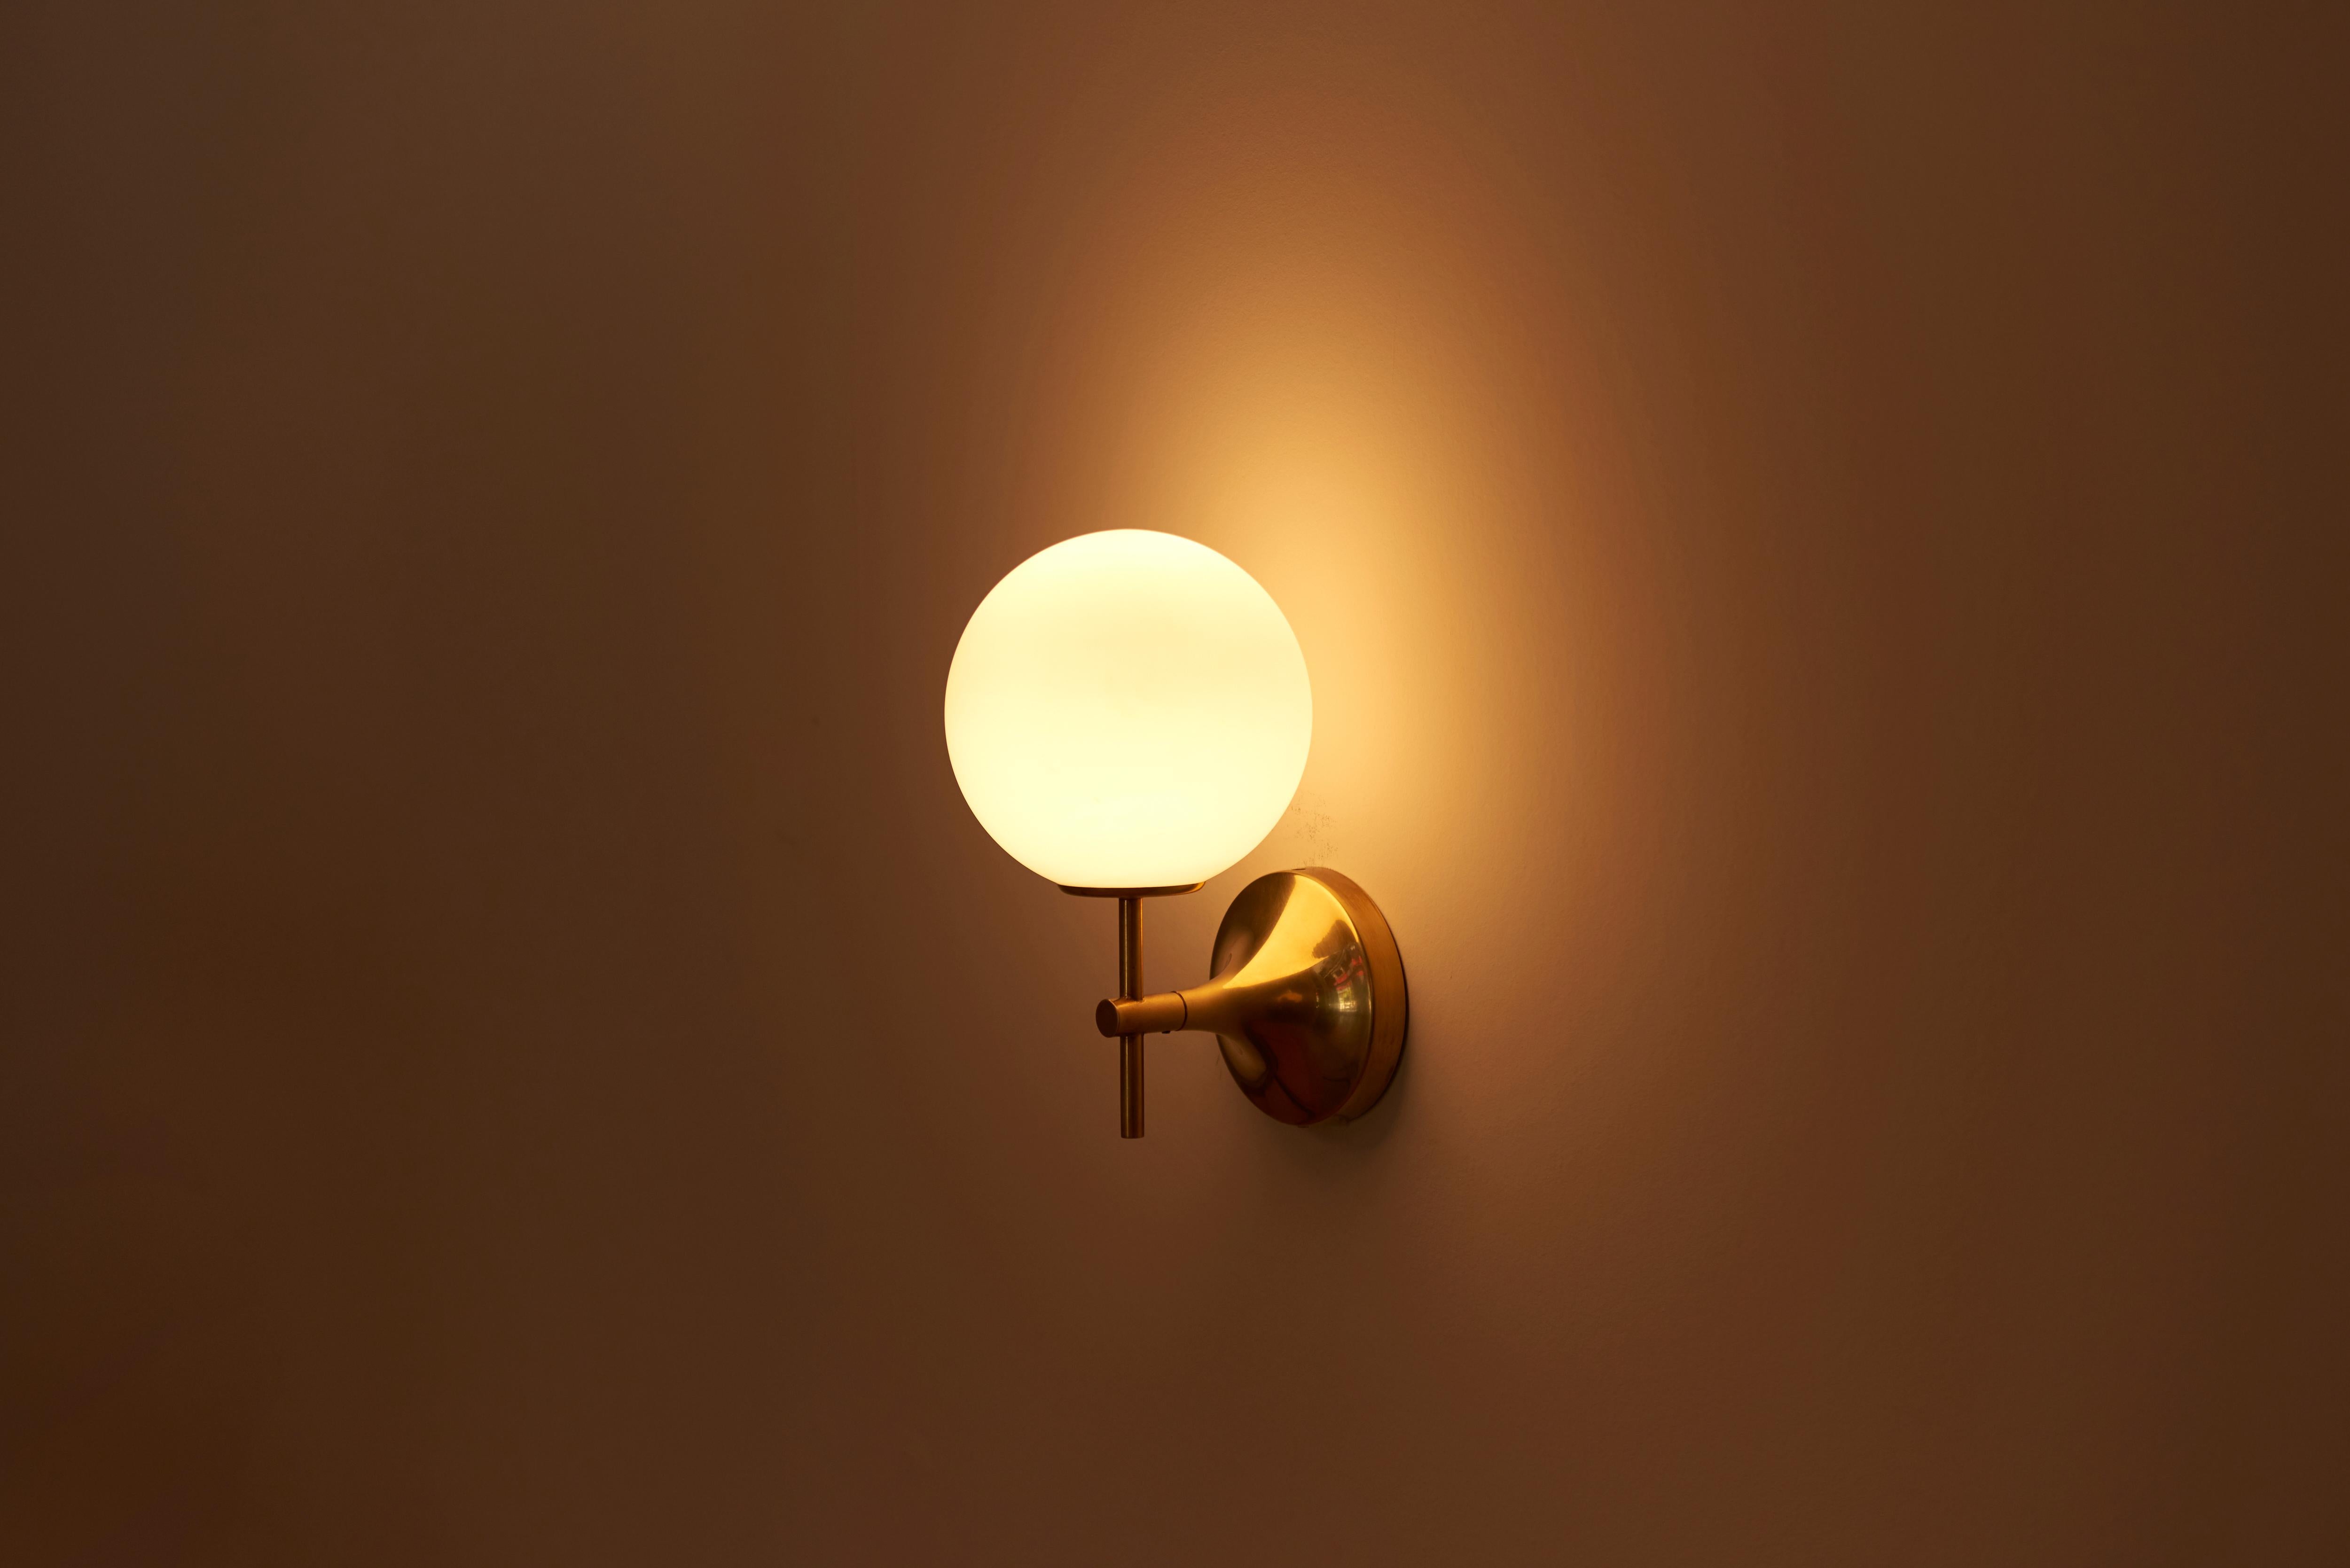 Pair of wall lights or sconces, composed of polished brass fixtures with white frosted glass globe shades.
Designed 1960s by Max Bill and manufactured by Temde Leuchten in Switzerland.

1 x E14 socket / each.

Please note: Lamp should be fitted